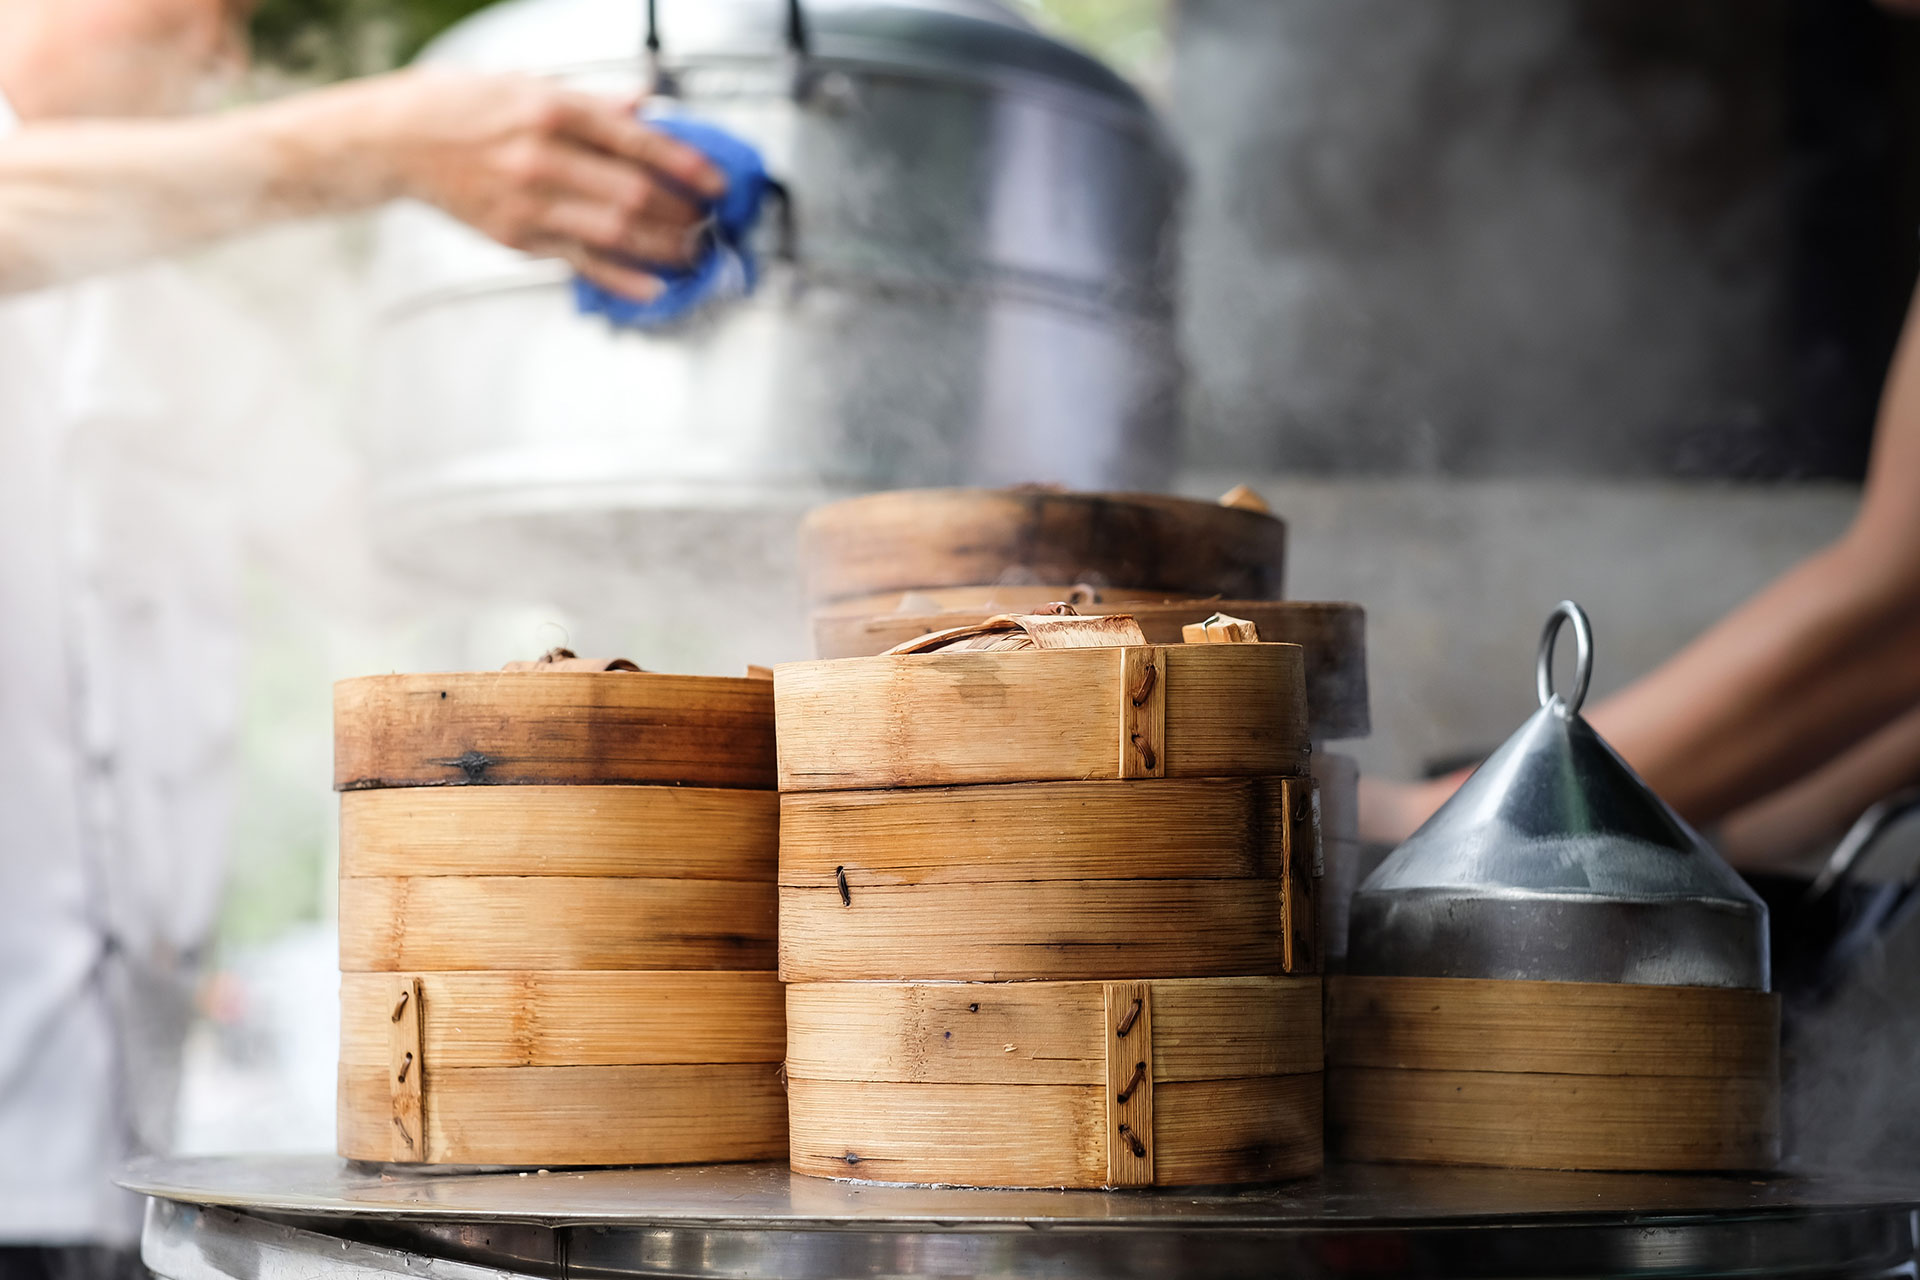 https://storables.com/wp-content/uploads/2023/07/what-can-you-cook-in-a-bamboo-steamer-1689911010.jpg